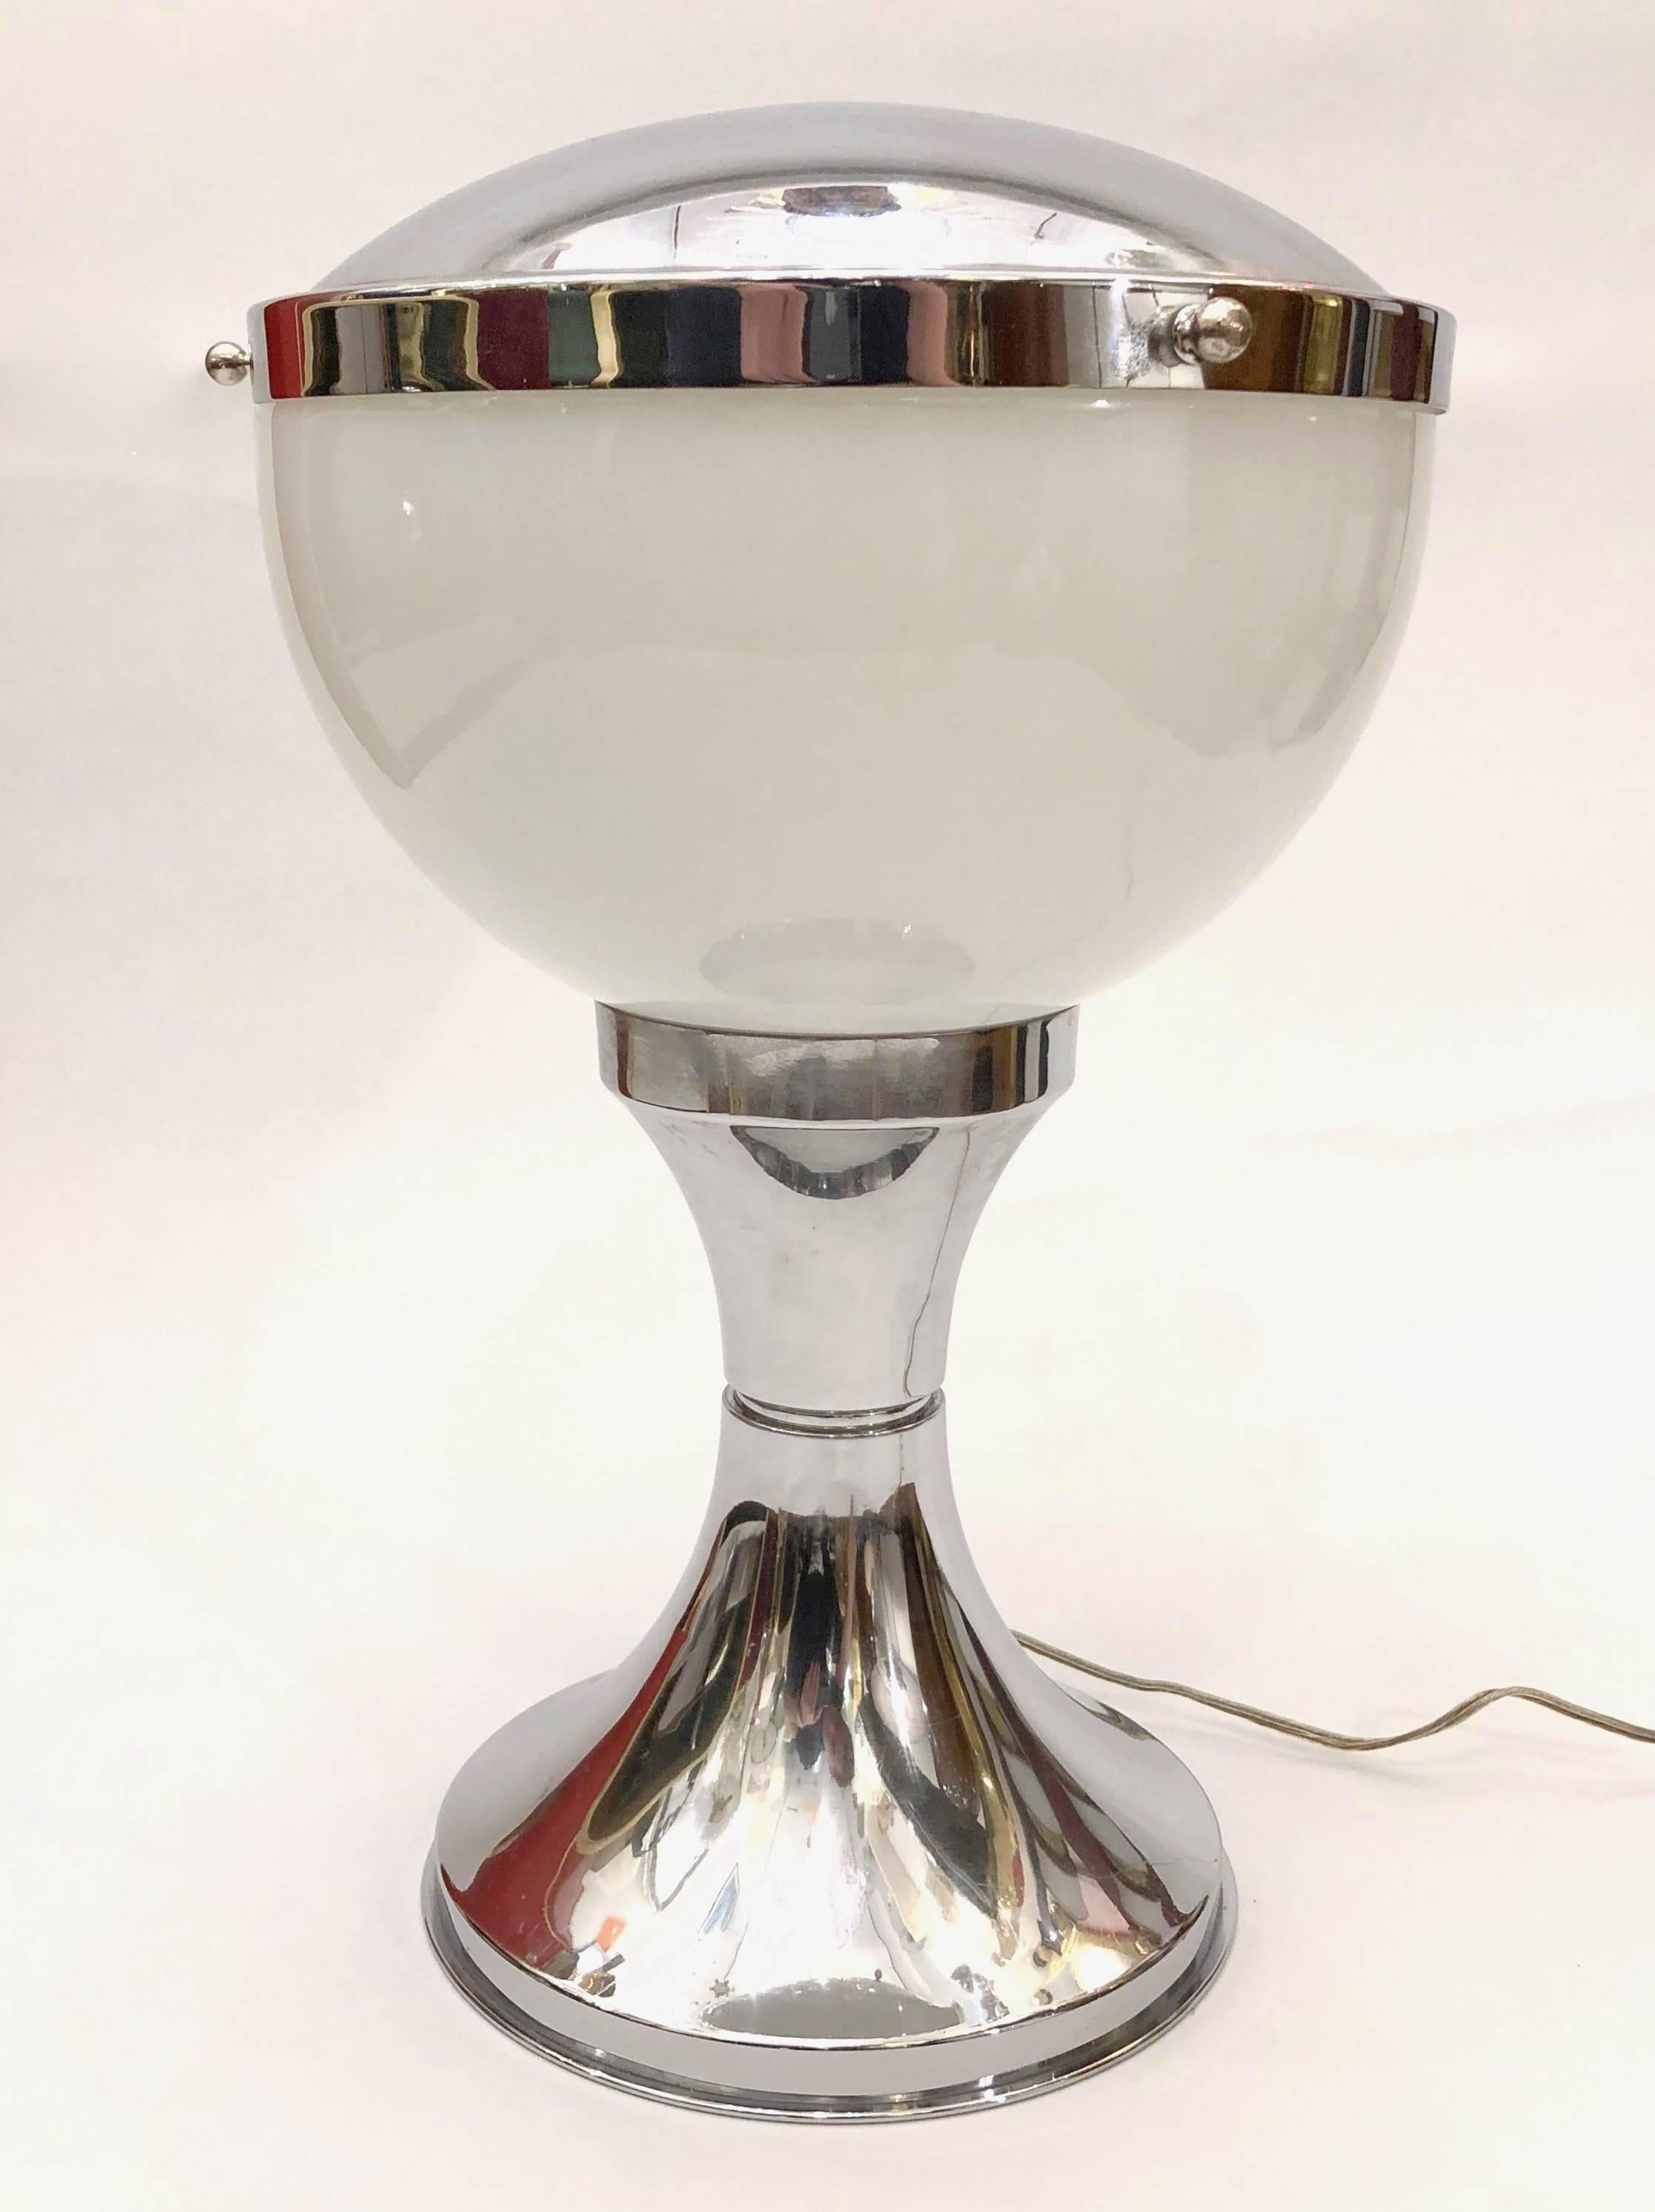 1960s Vintage Minimalist Italian Design Nickel and White Glass Desk Table Lamp For Sale 1